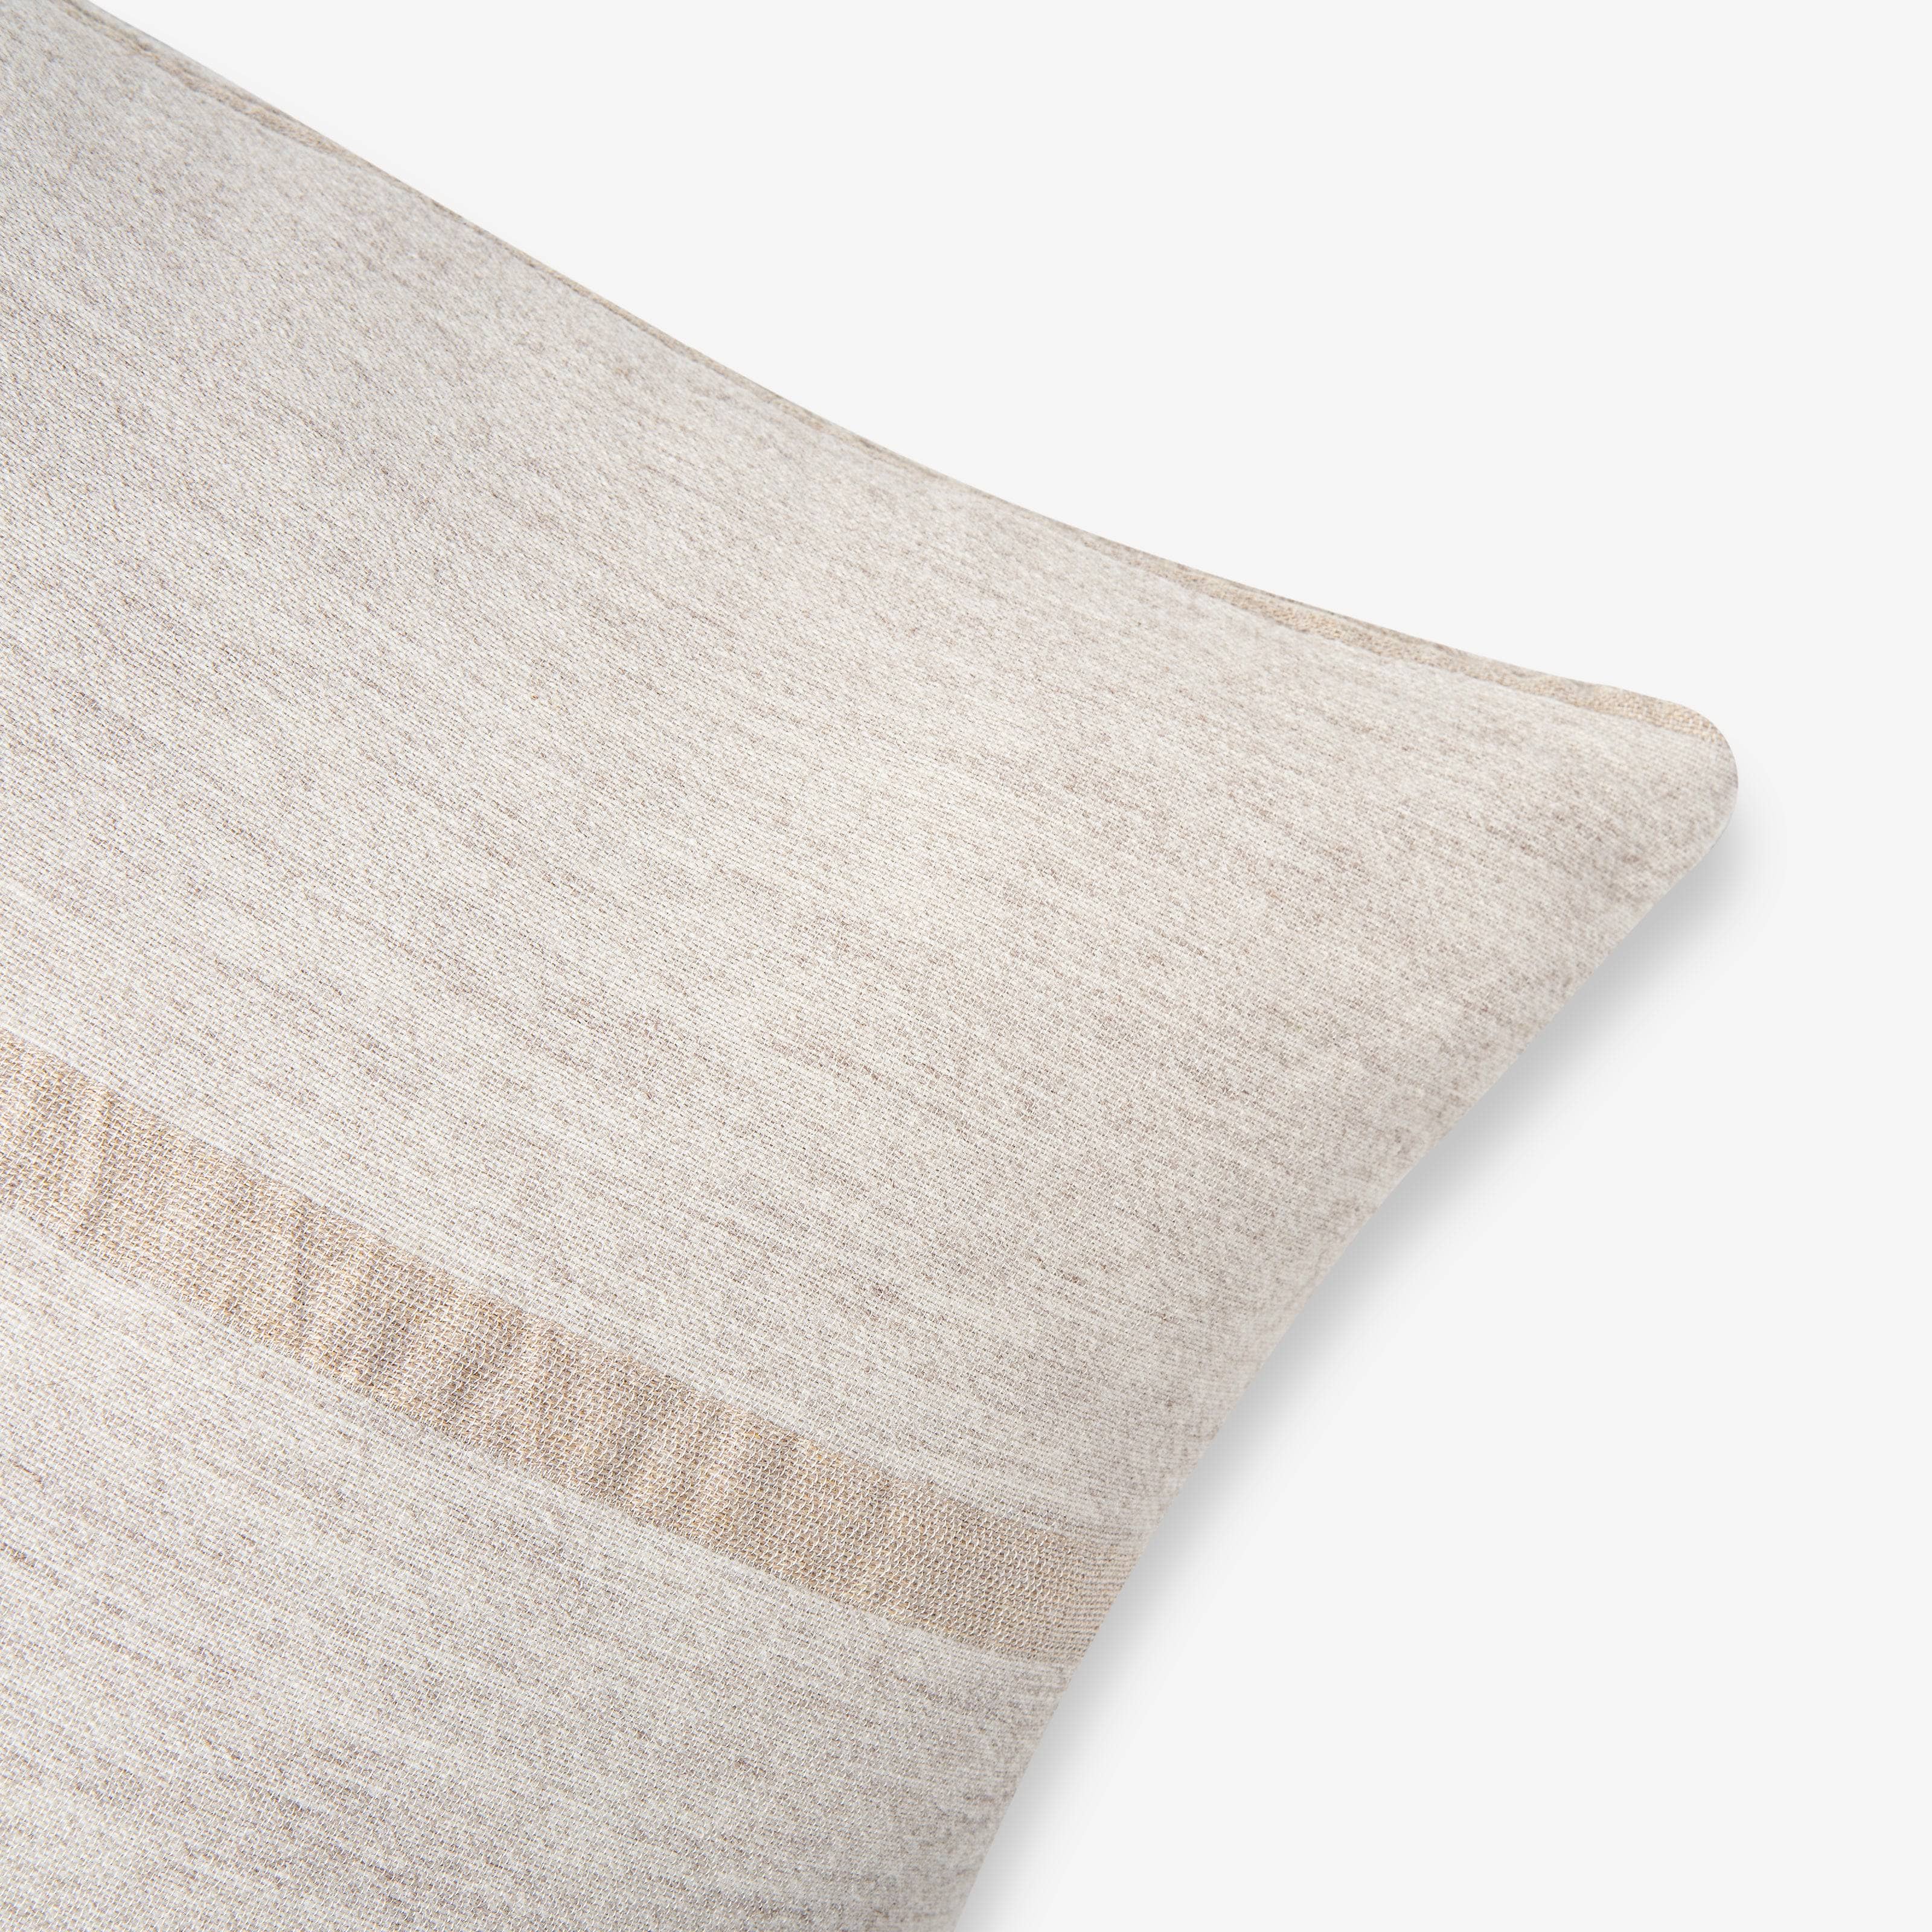 Andreo Cushion Cover, Grey - Beige, 40x60cm 2